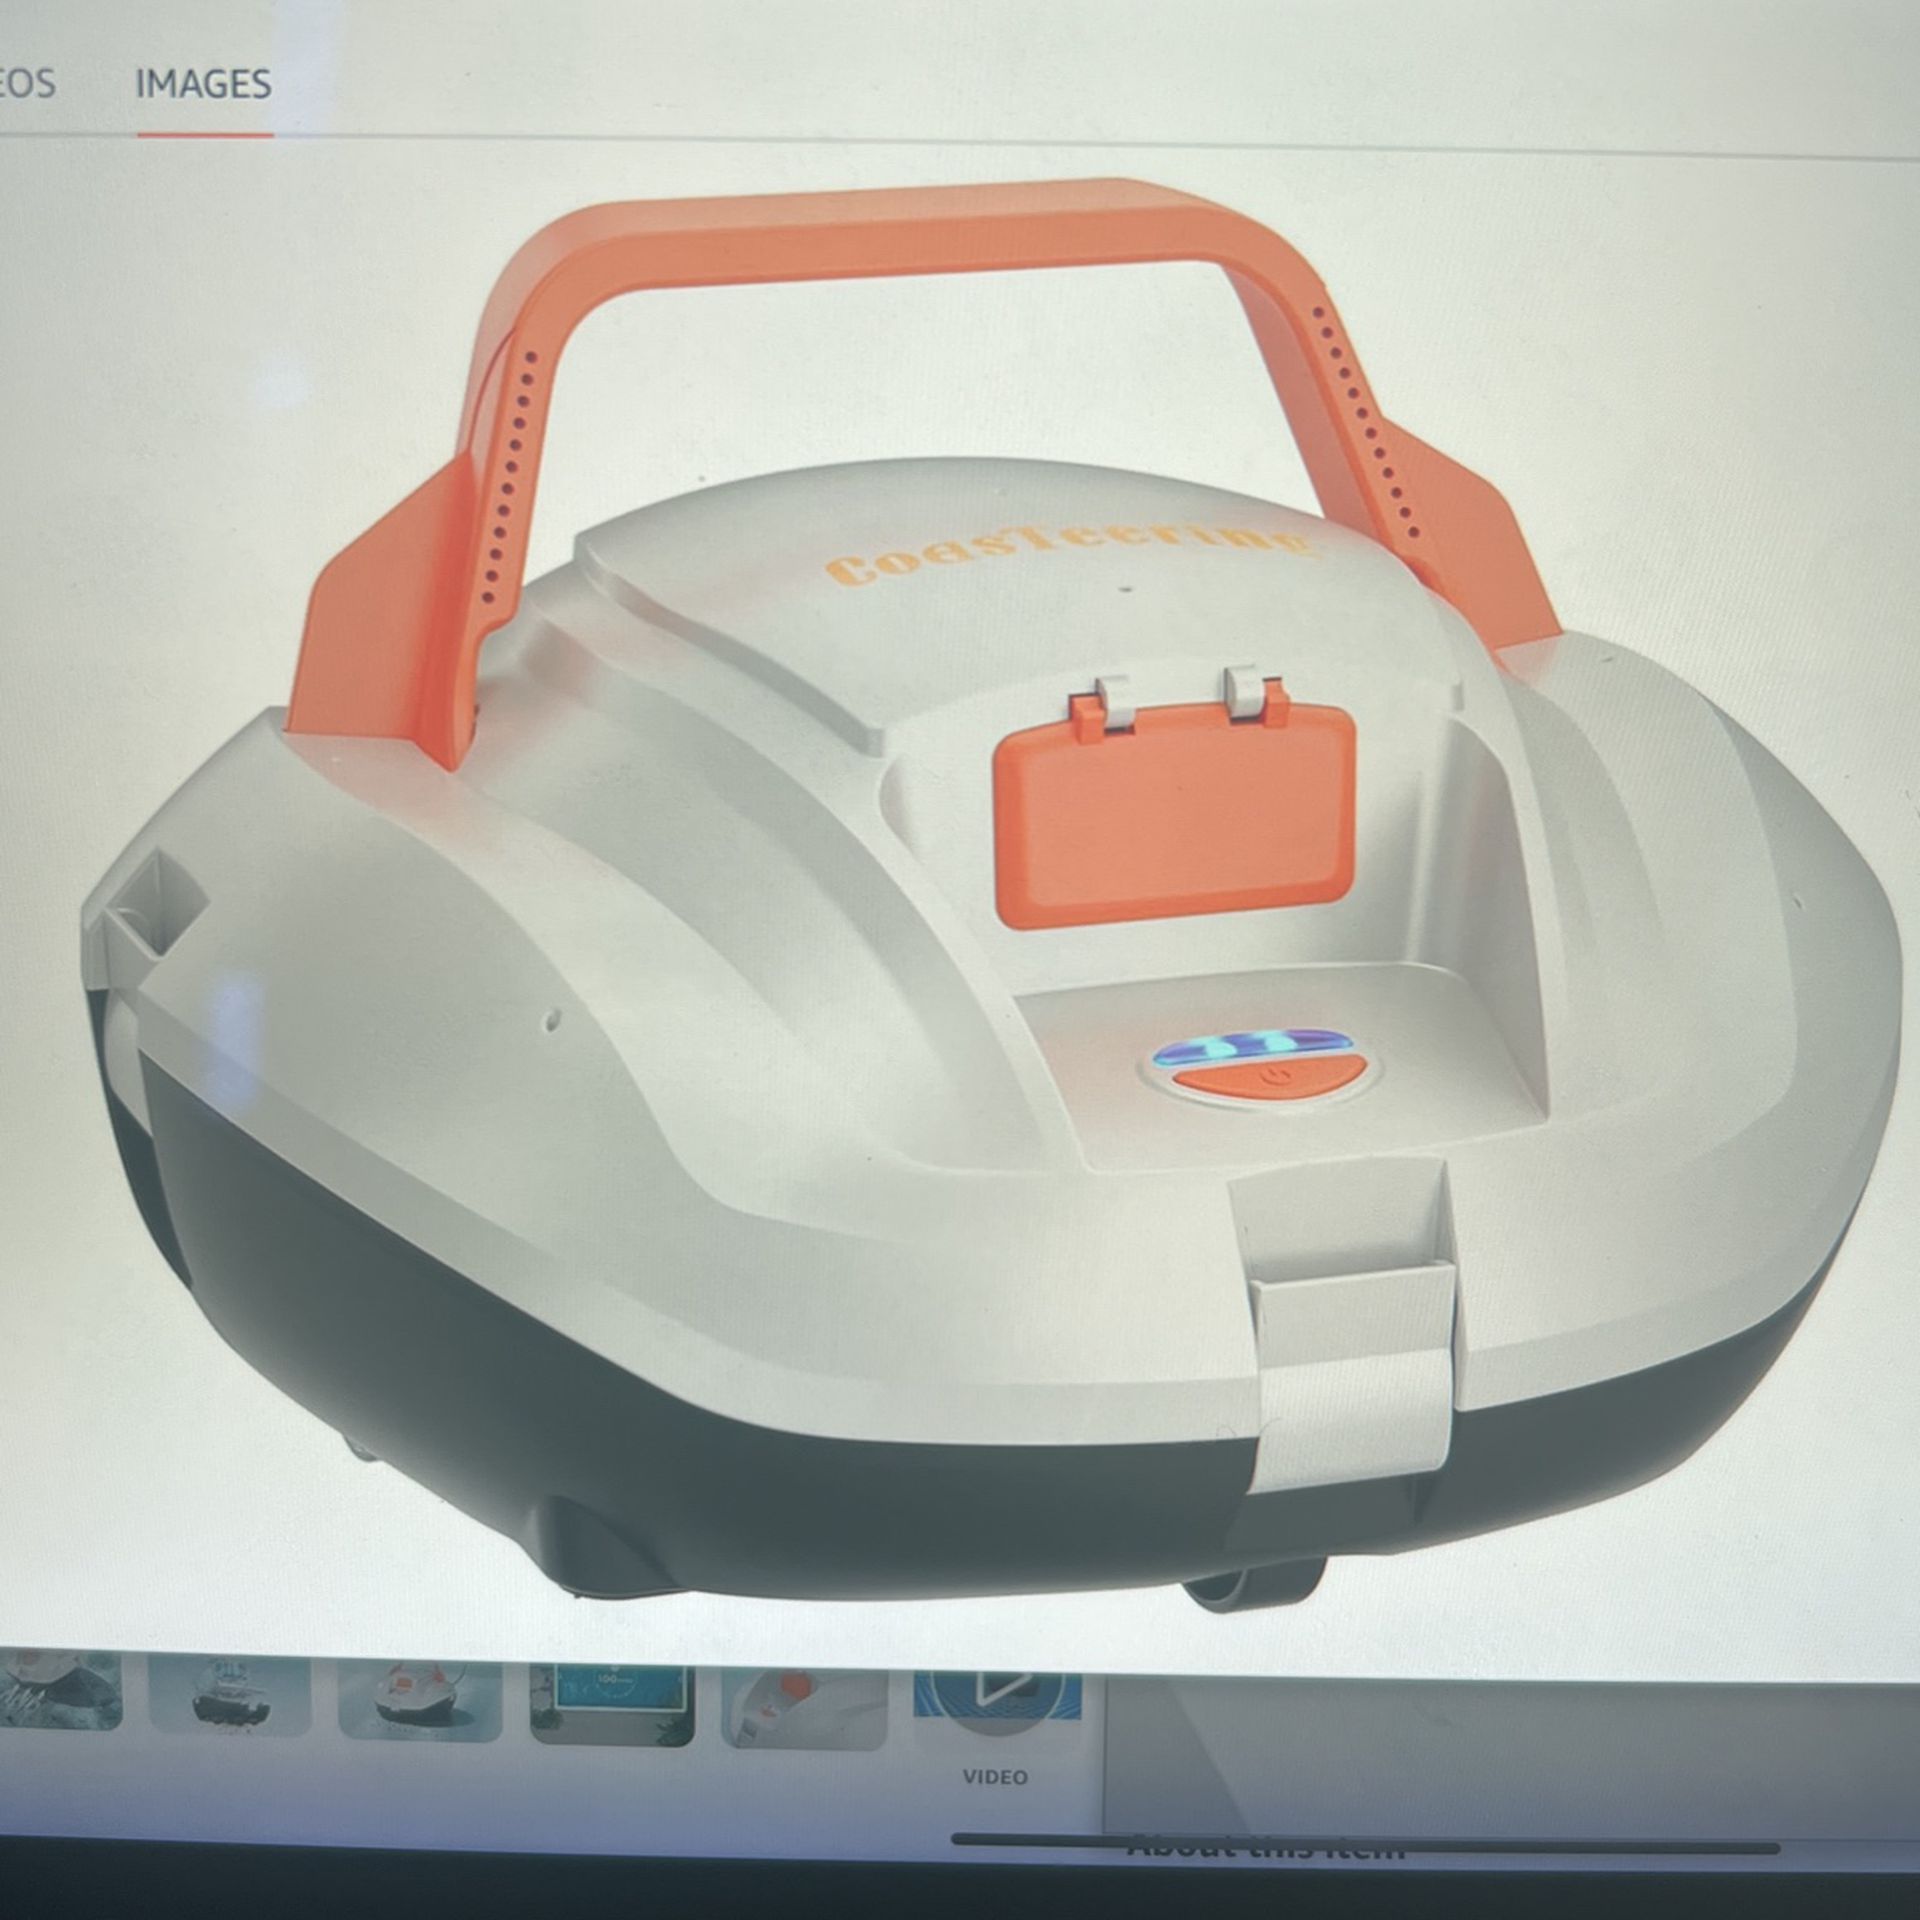 NEW ROBOTIC POOL CLEANER. Last Up to 100Min, Cordless Pool Vacuum for Above Ground Pool. Has Fast Charging, Powerful Suction, Ideal for 850Sq.ft. 